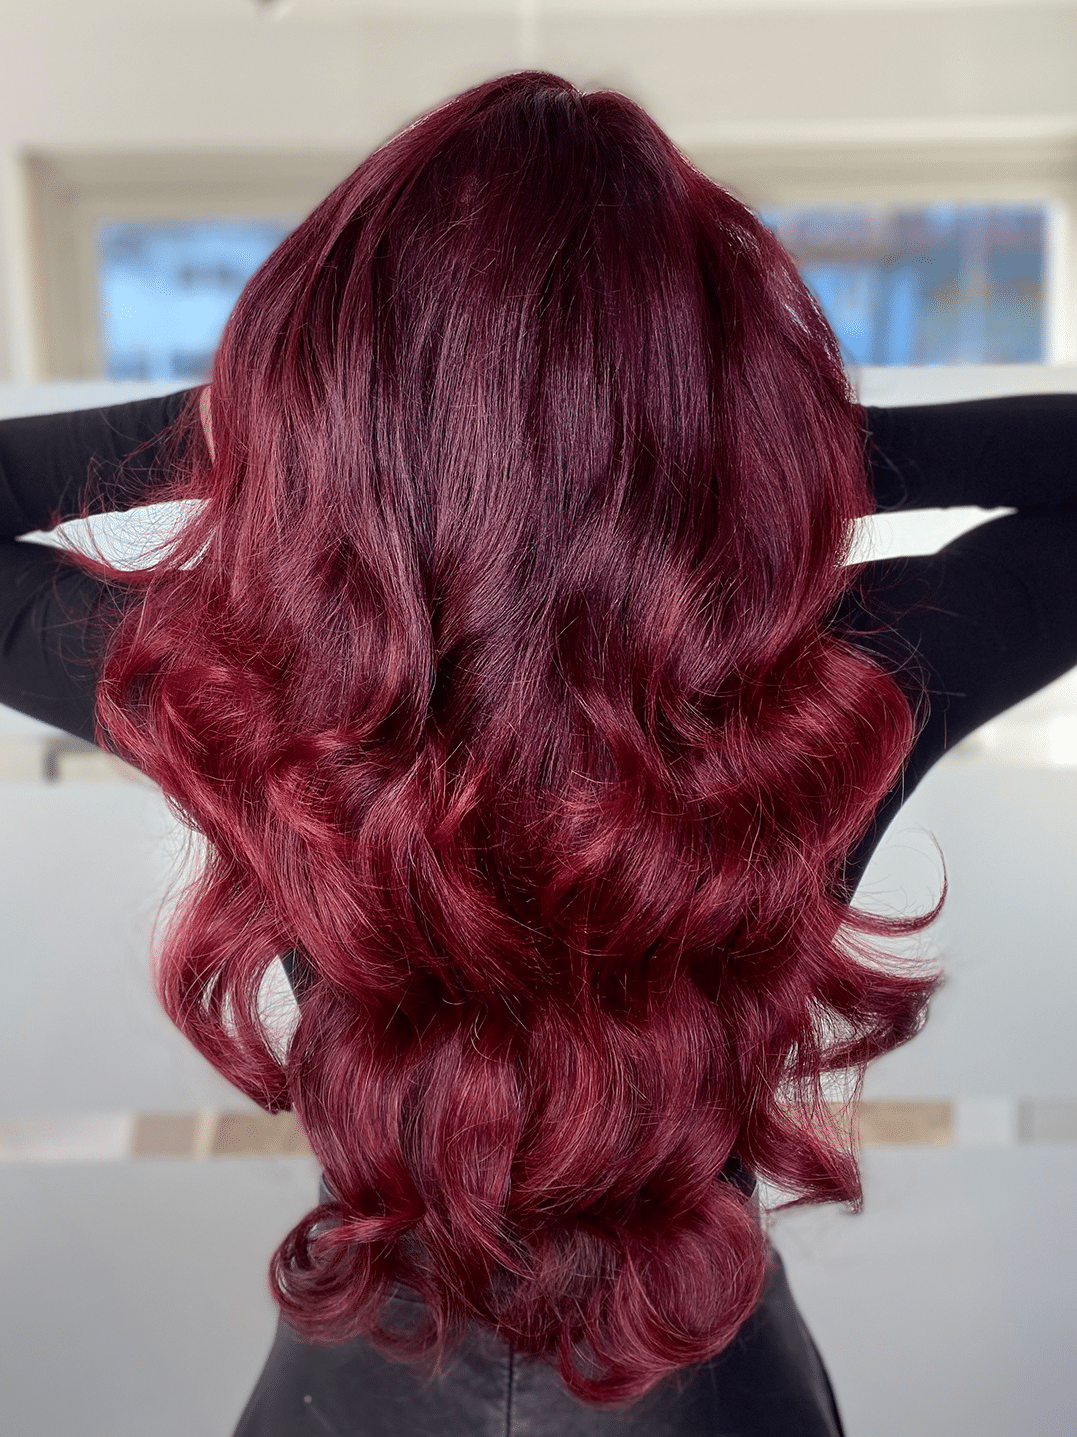 Hair extension with #INSPOS for woman with red long hair